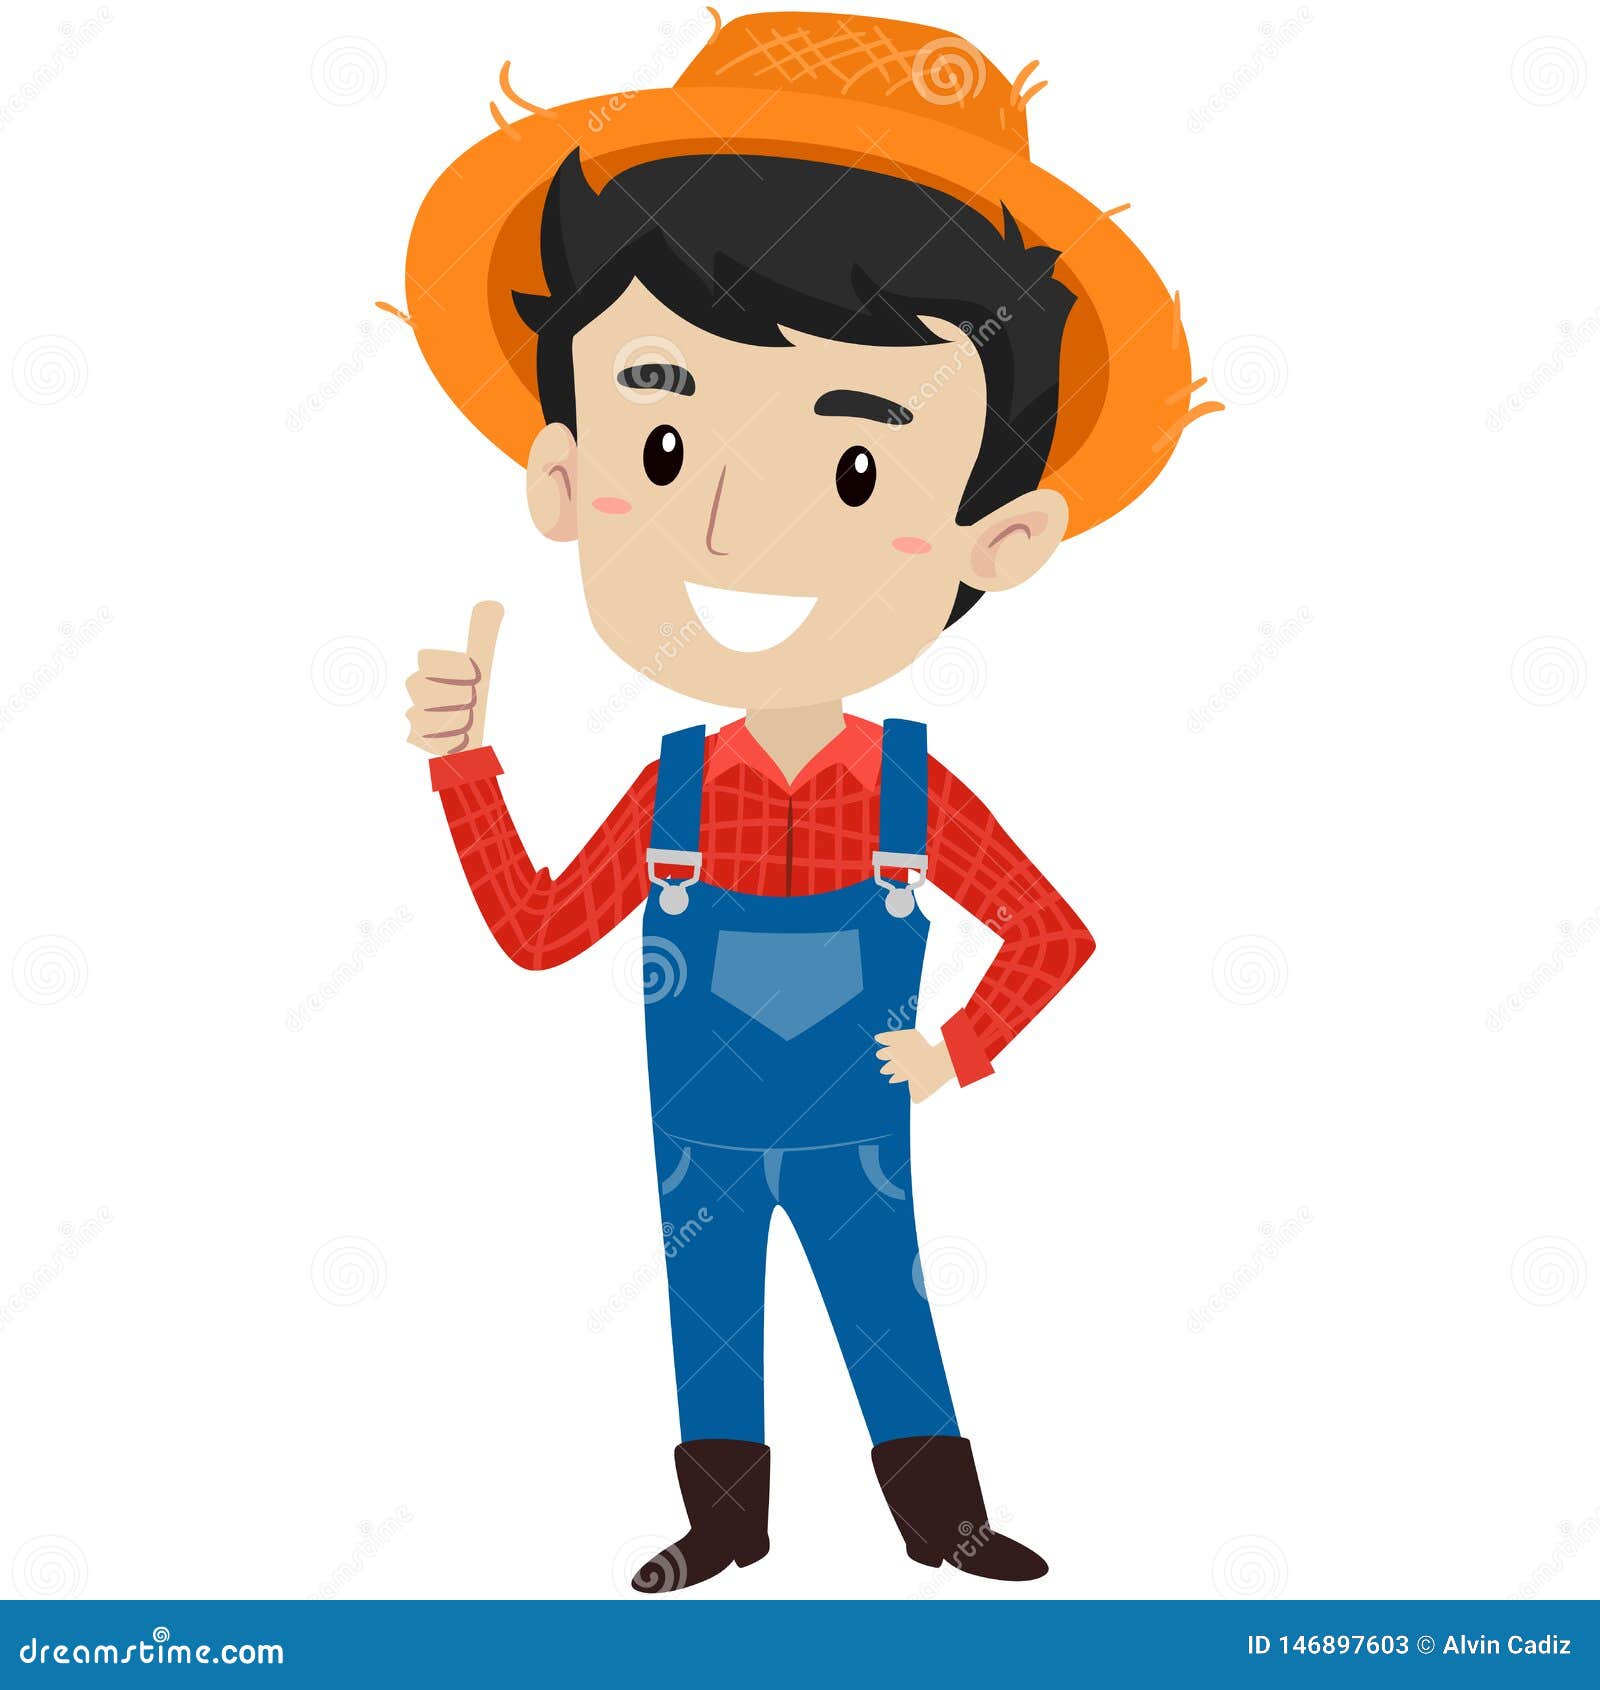 Ector Illustration of a Farmer Showing Thumbs Up Gesture Stock Vector ...